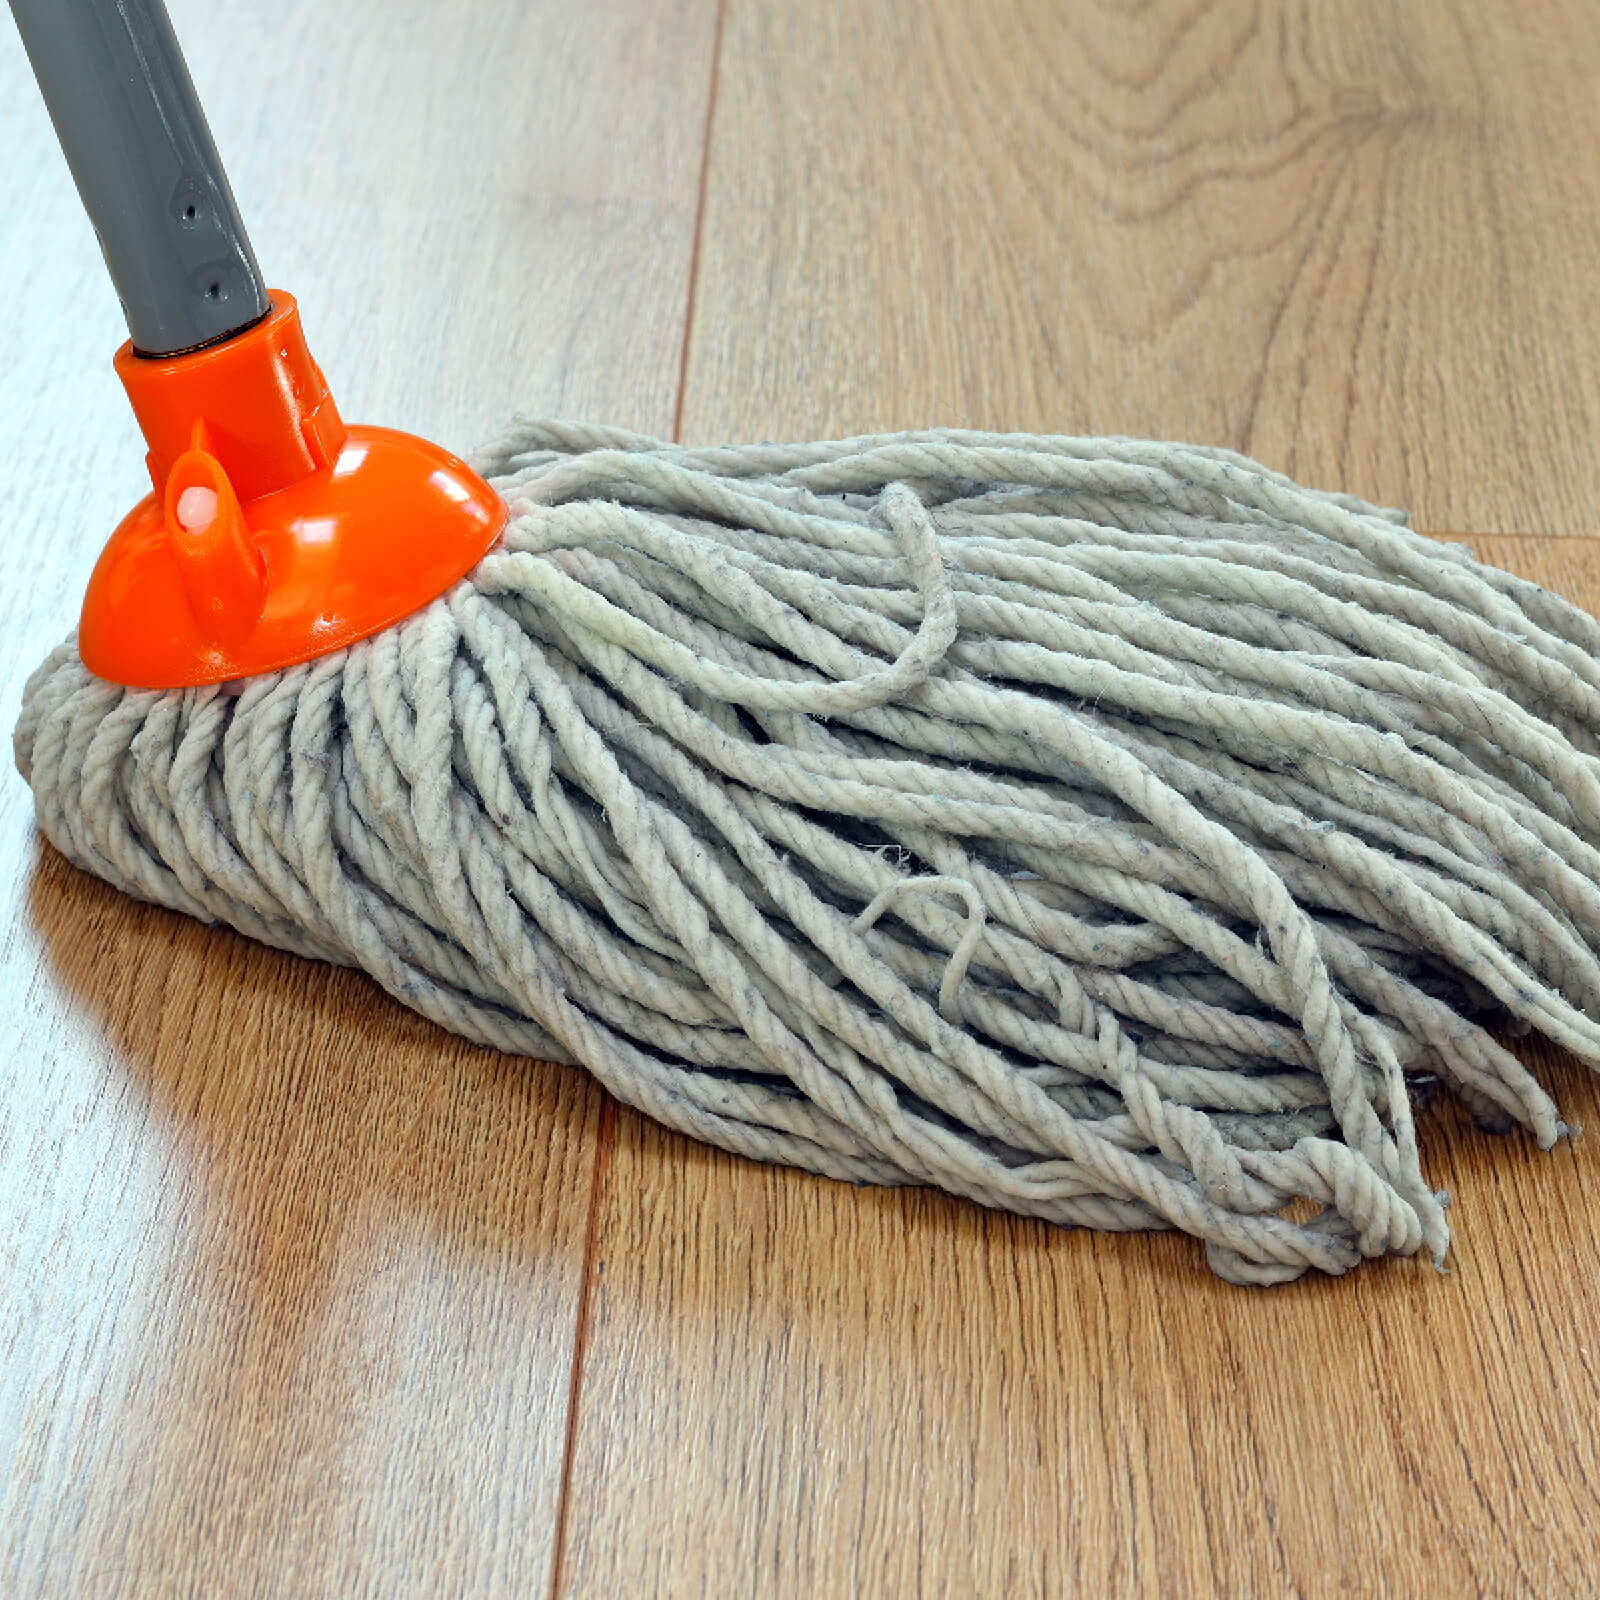 Hardwood Cleaning | Corvin's Floors & Cabinets